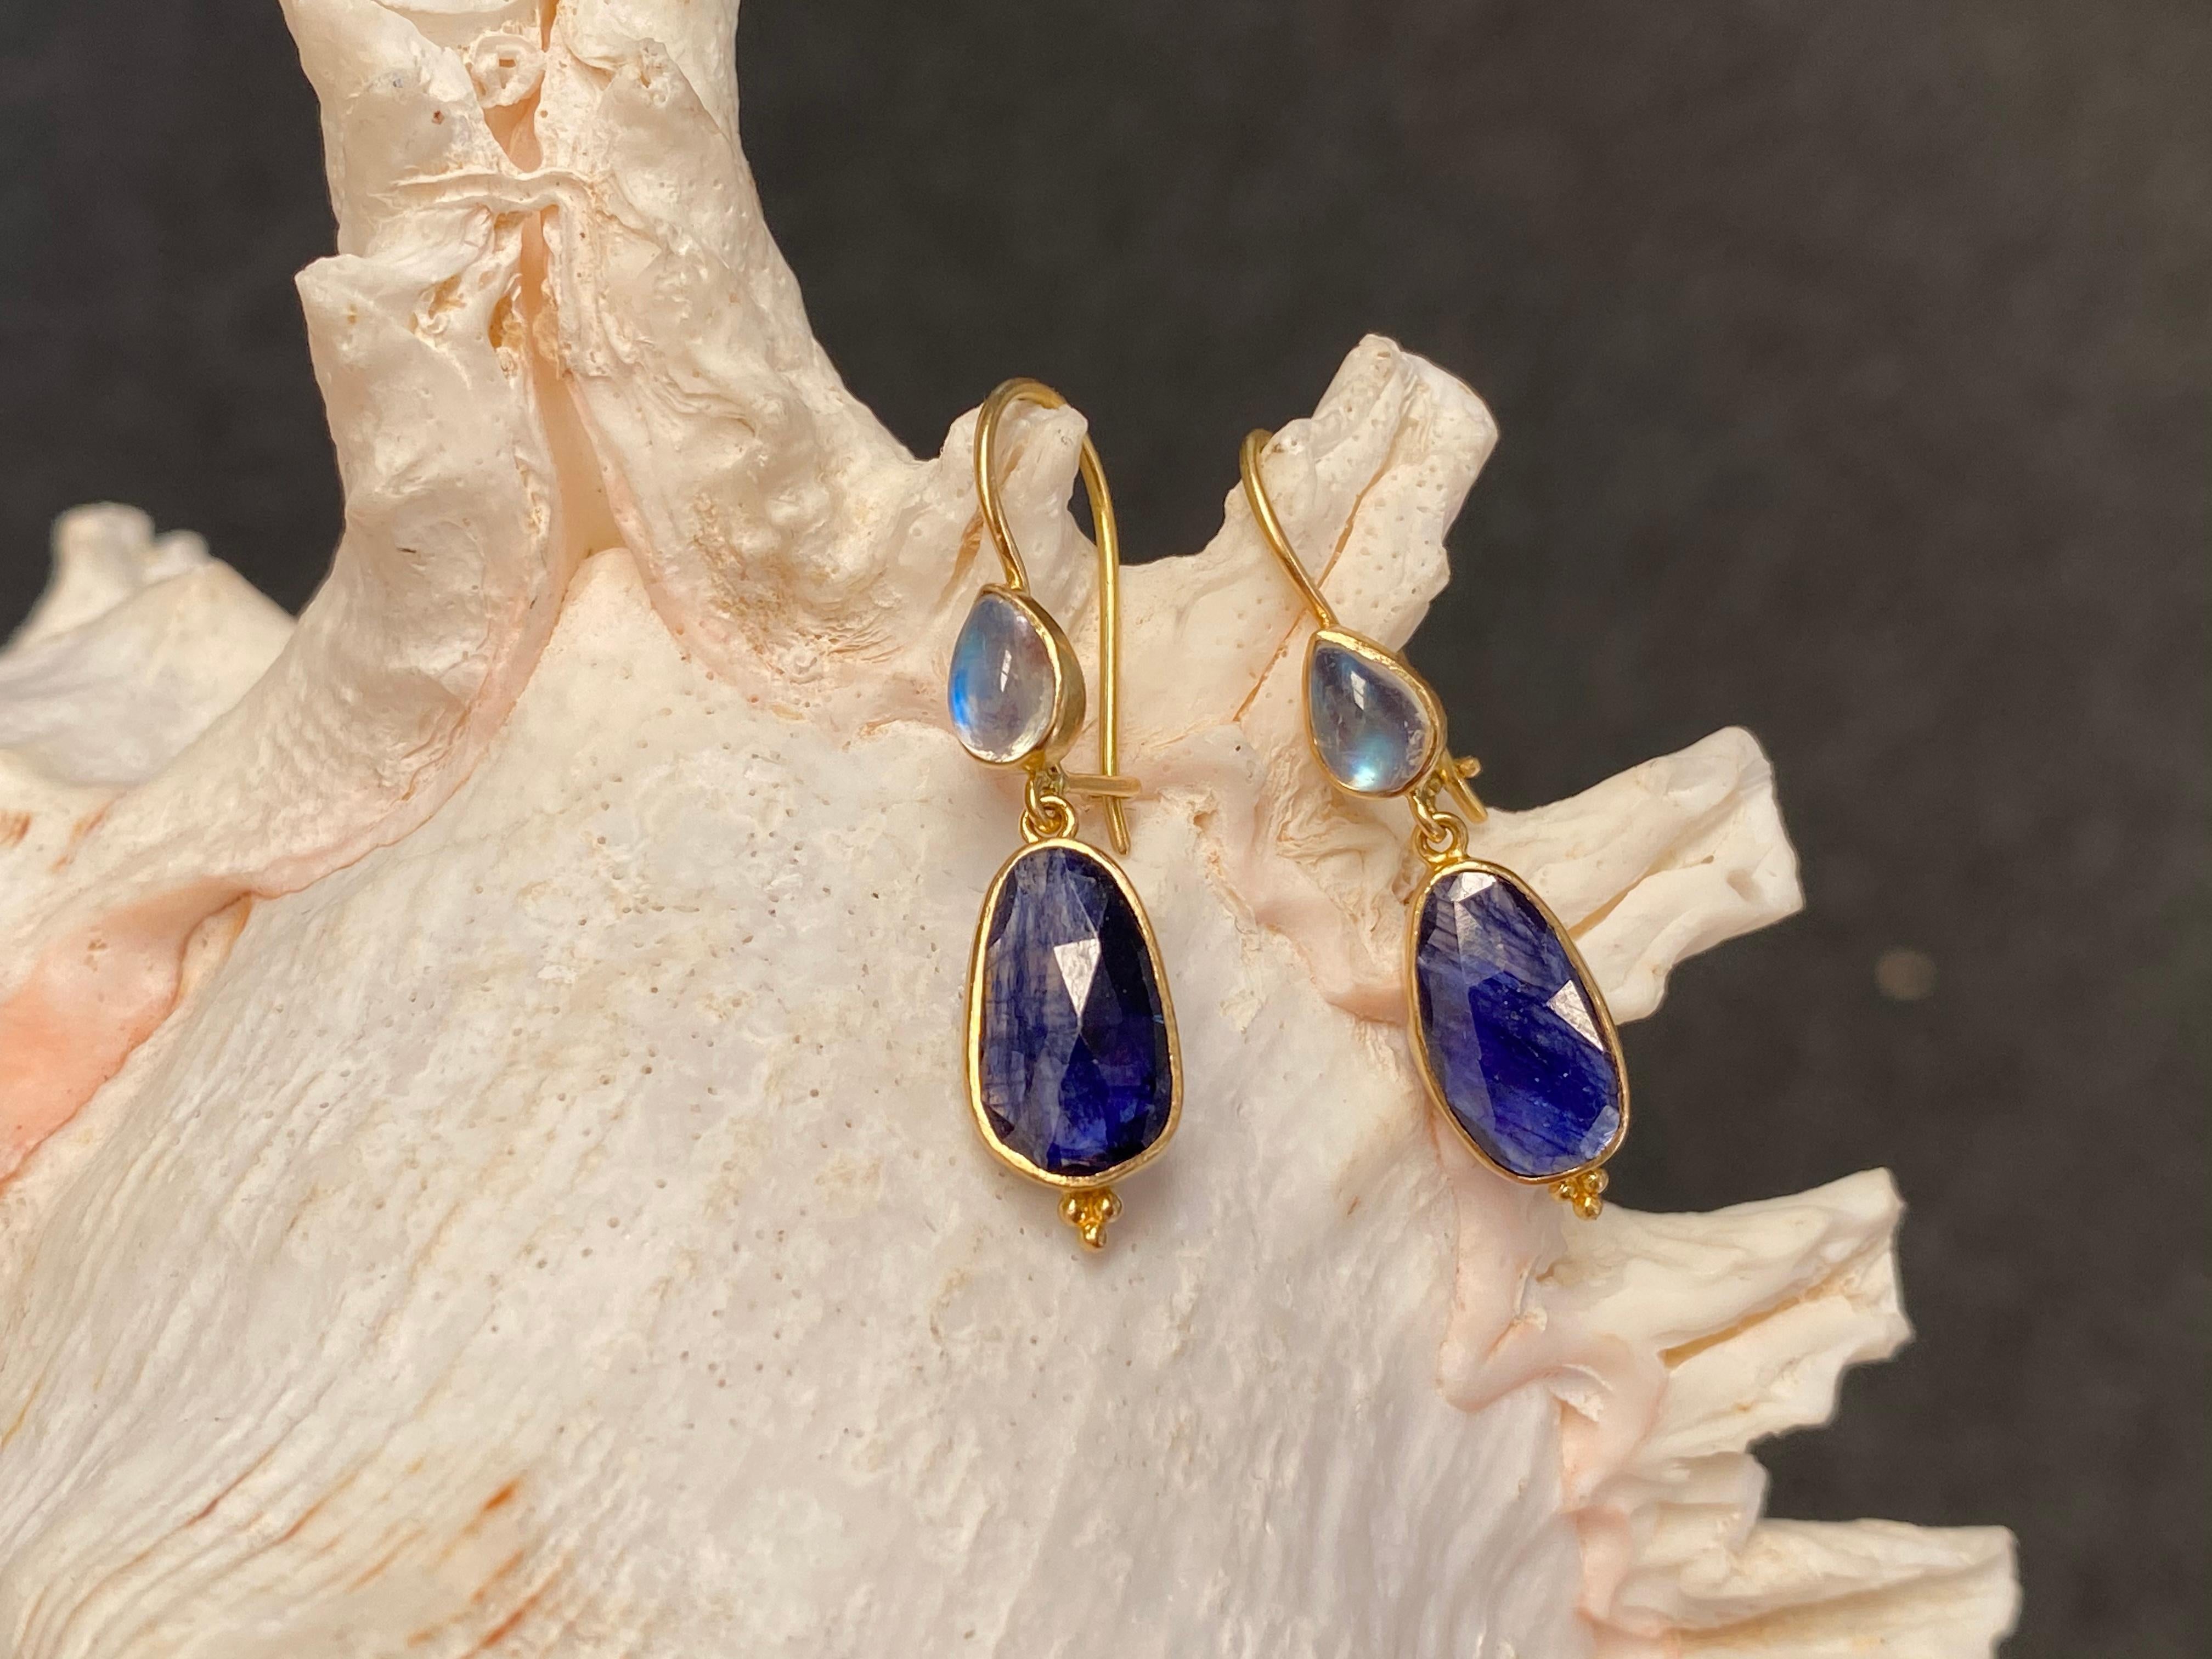 Irregular rose cut blue sapphires are suspended below pear shaped rainbow cabochons in this design. A simple display of complementary colors and contrasting shapes. Safety clasp wires. 7,8 carats total stone weight. 